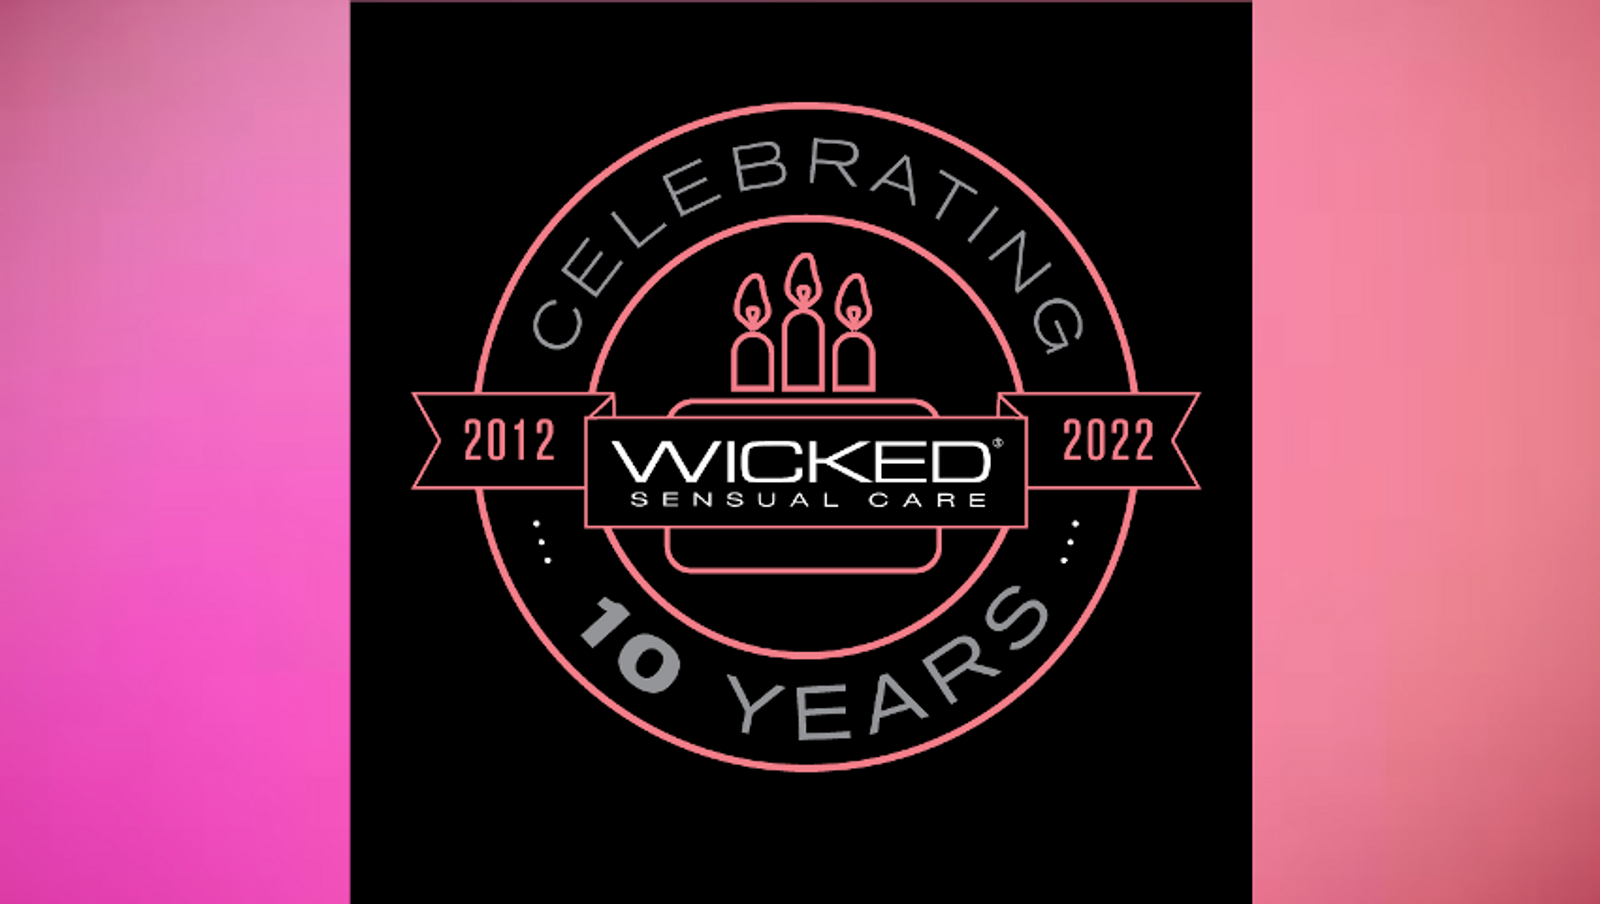 Wicked Sensual Care Toasts 10-Year Anniversary